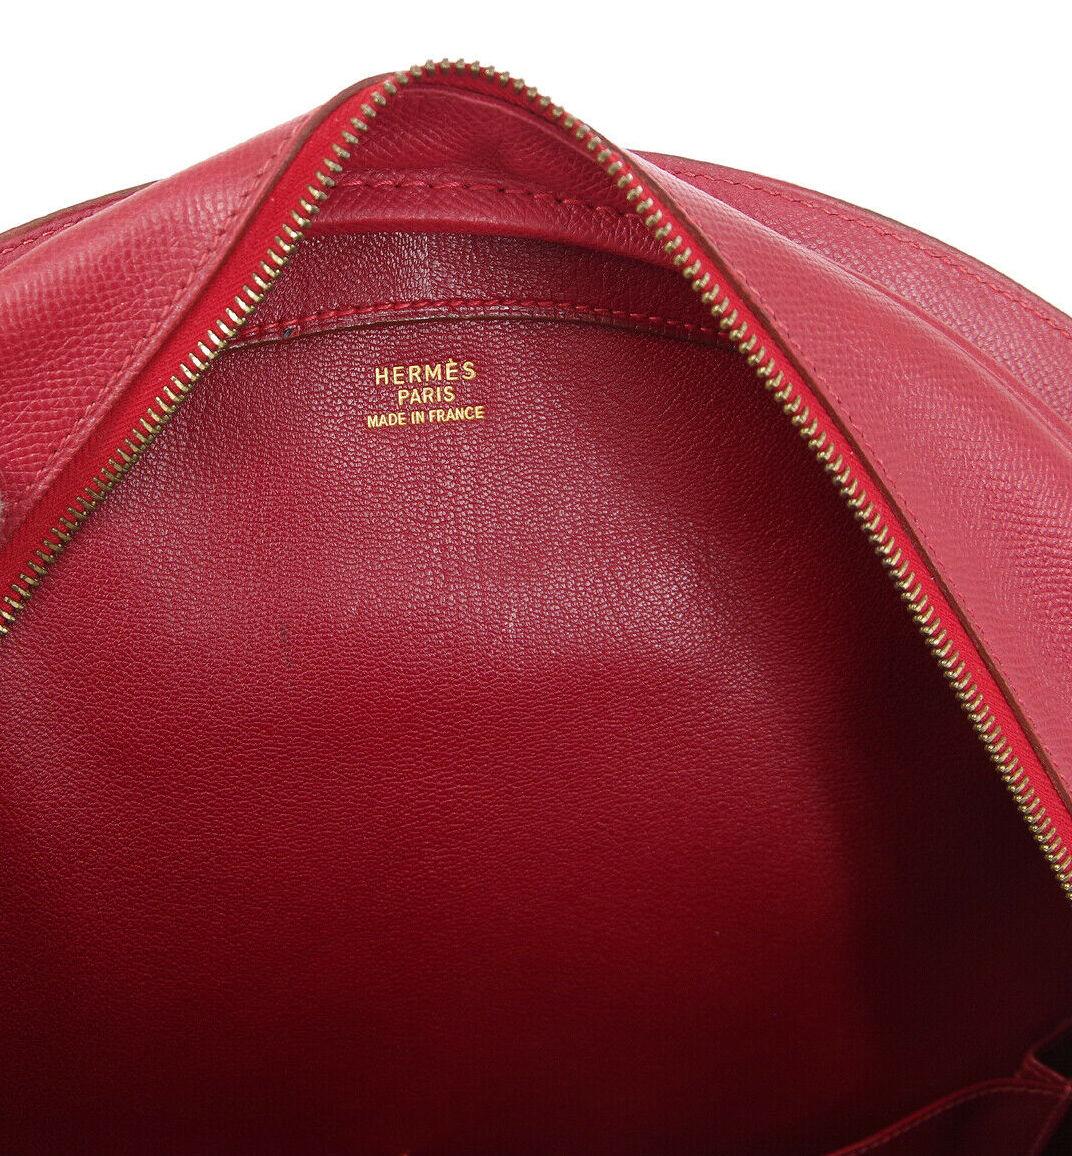 Hermes Red Leather Large Men's Women's Travel Carryall Top Handle Bowling Tote 4